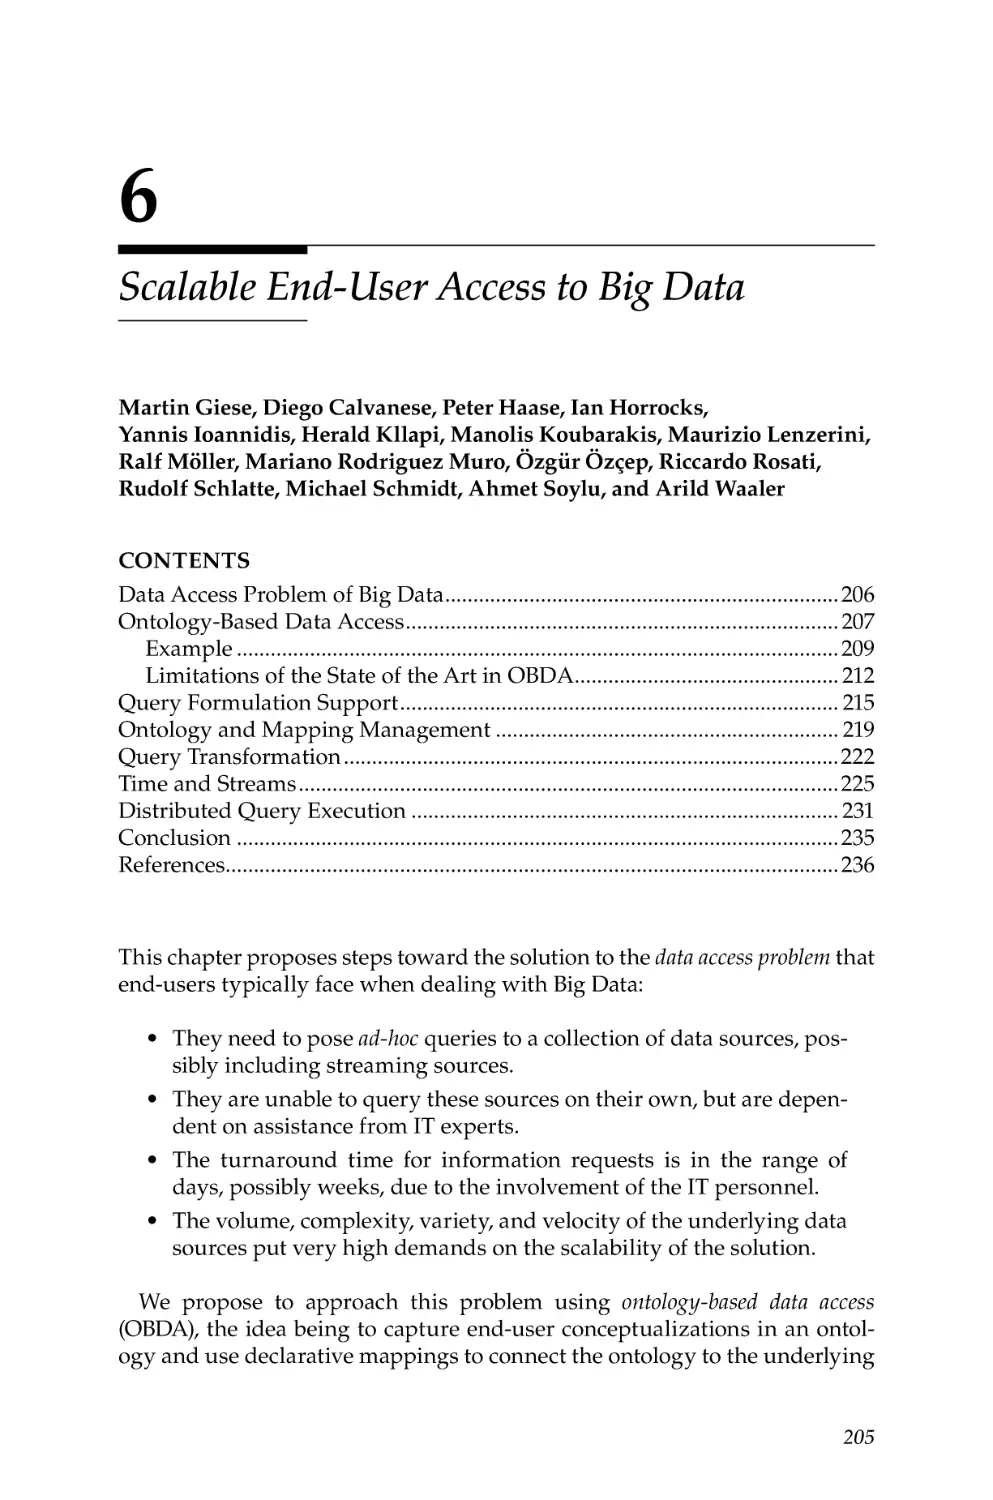 6. Scalable End-User Access to Big Data